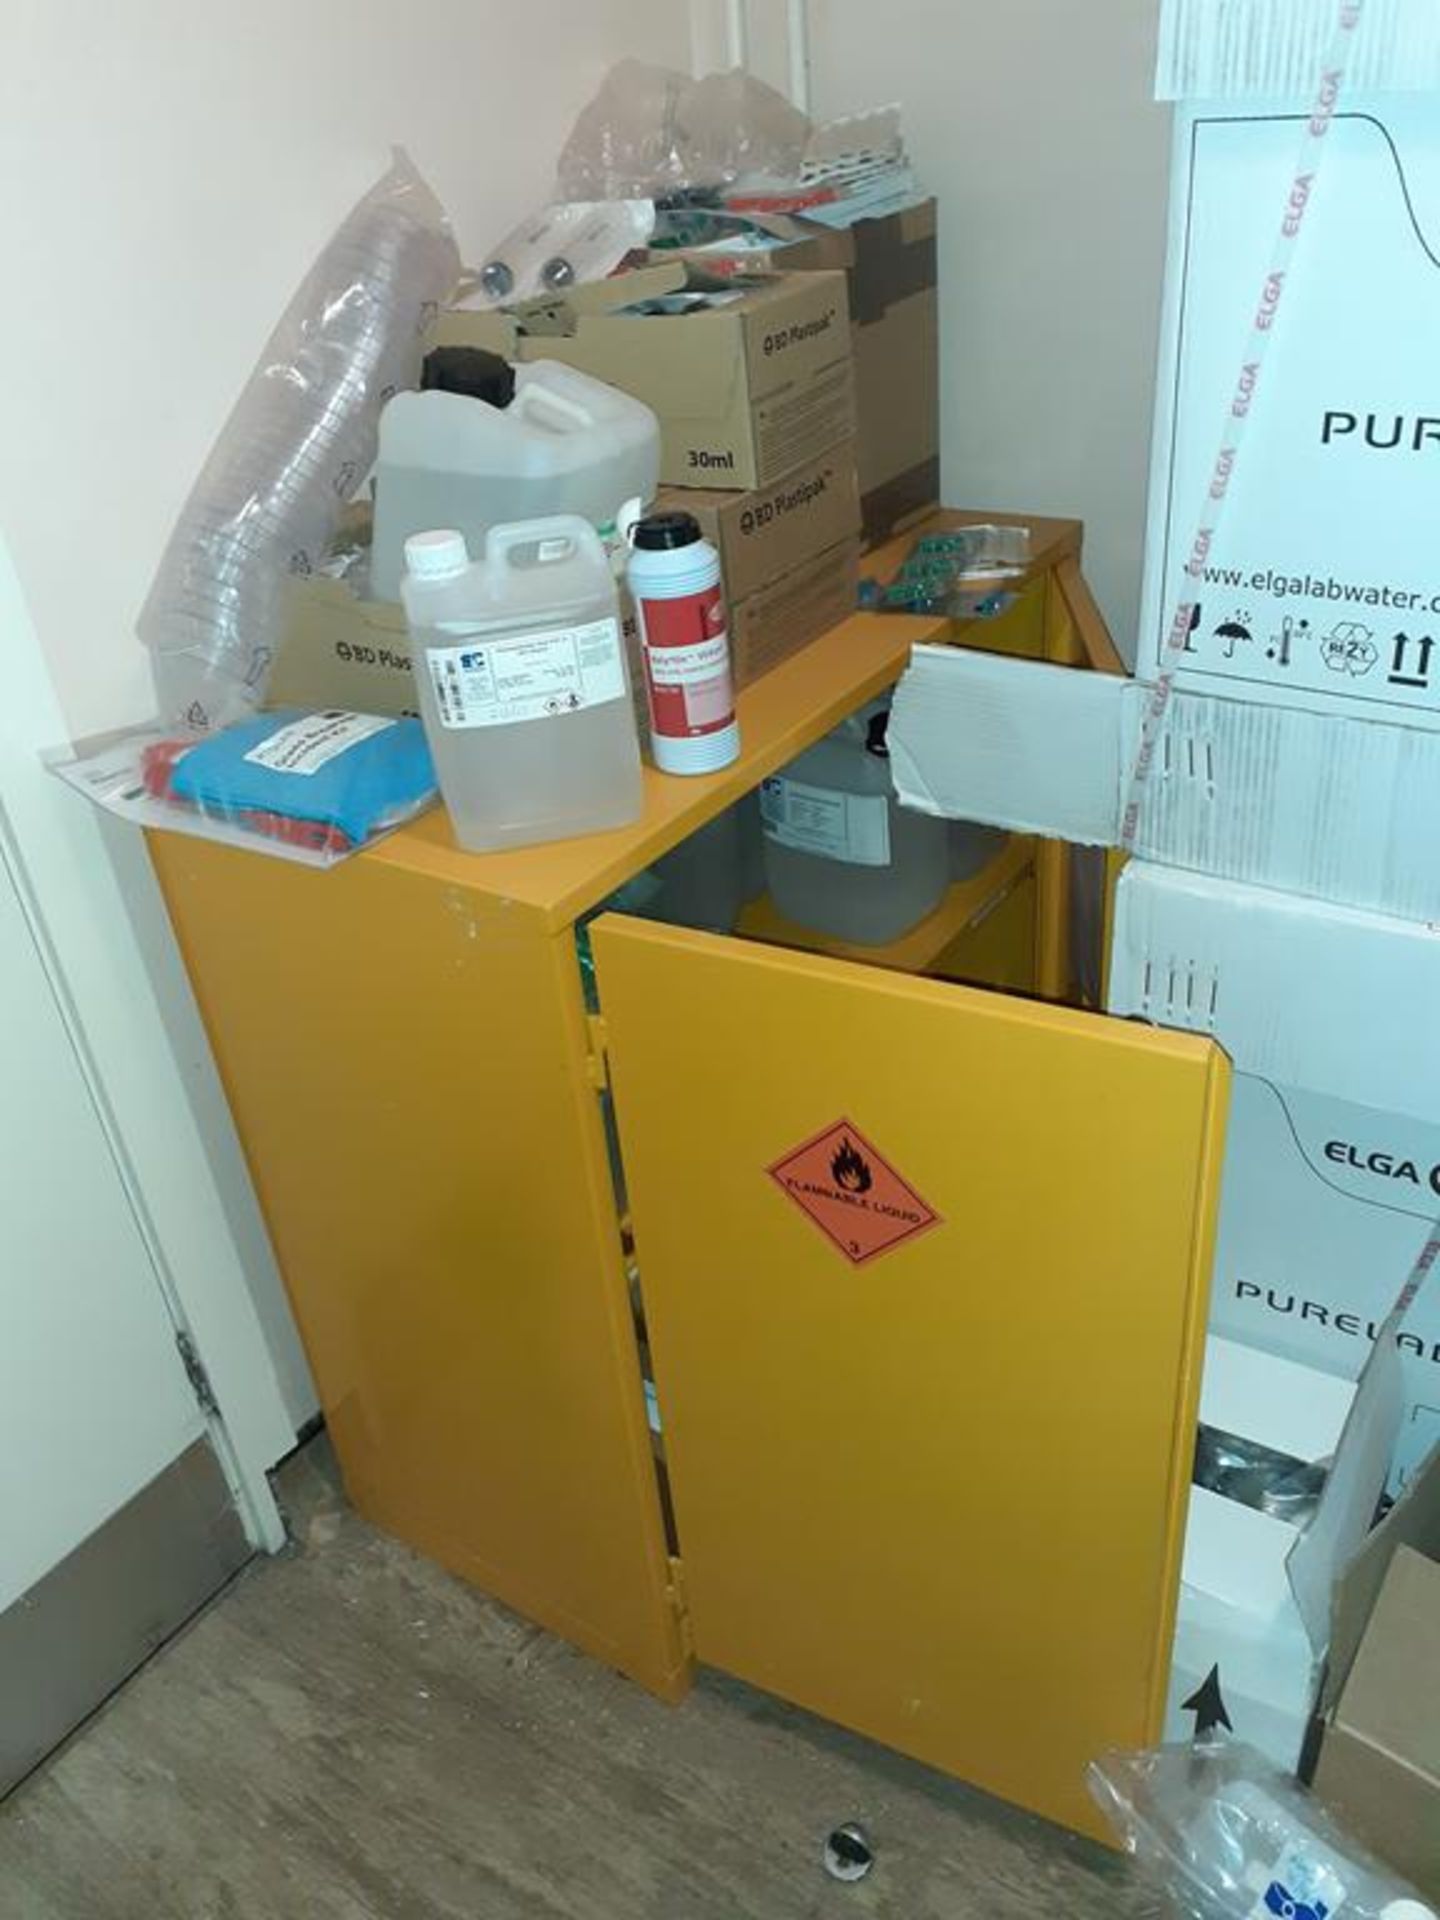 Contents of Chemical storage cupboard including 1